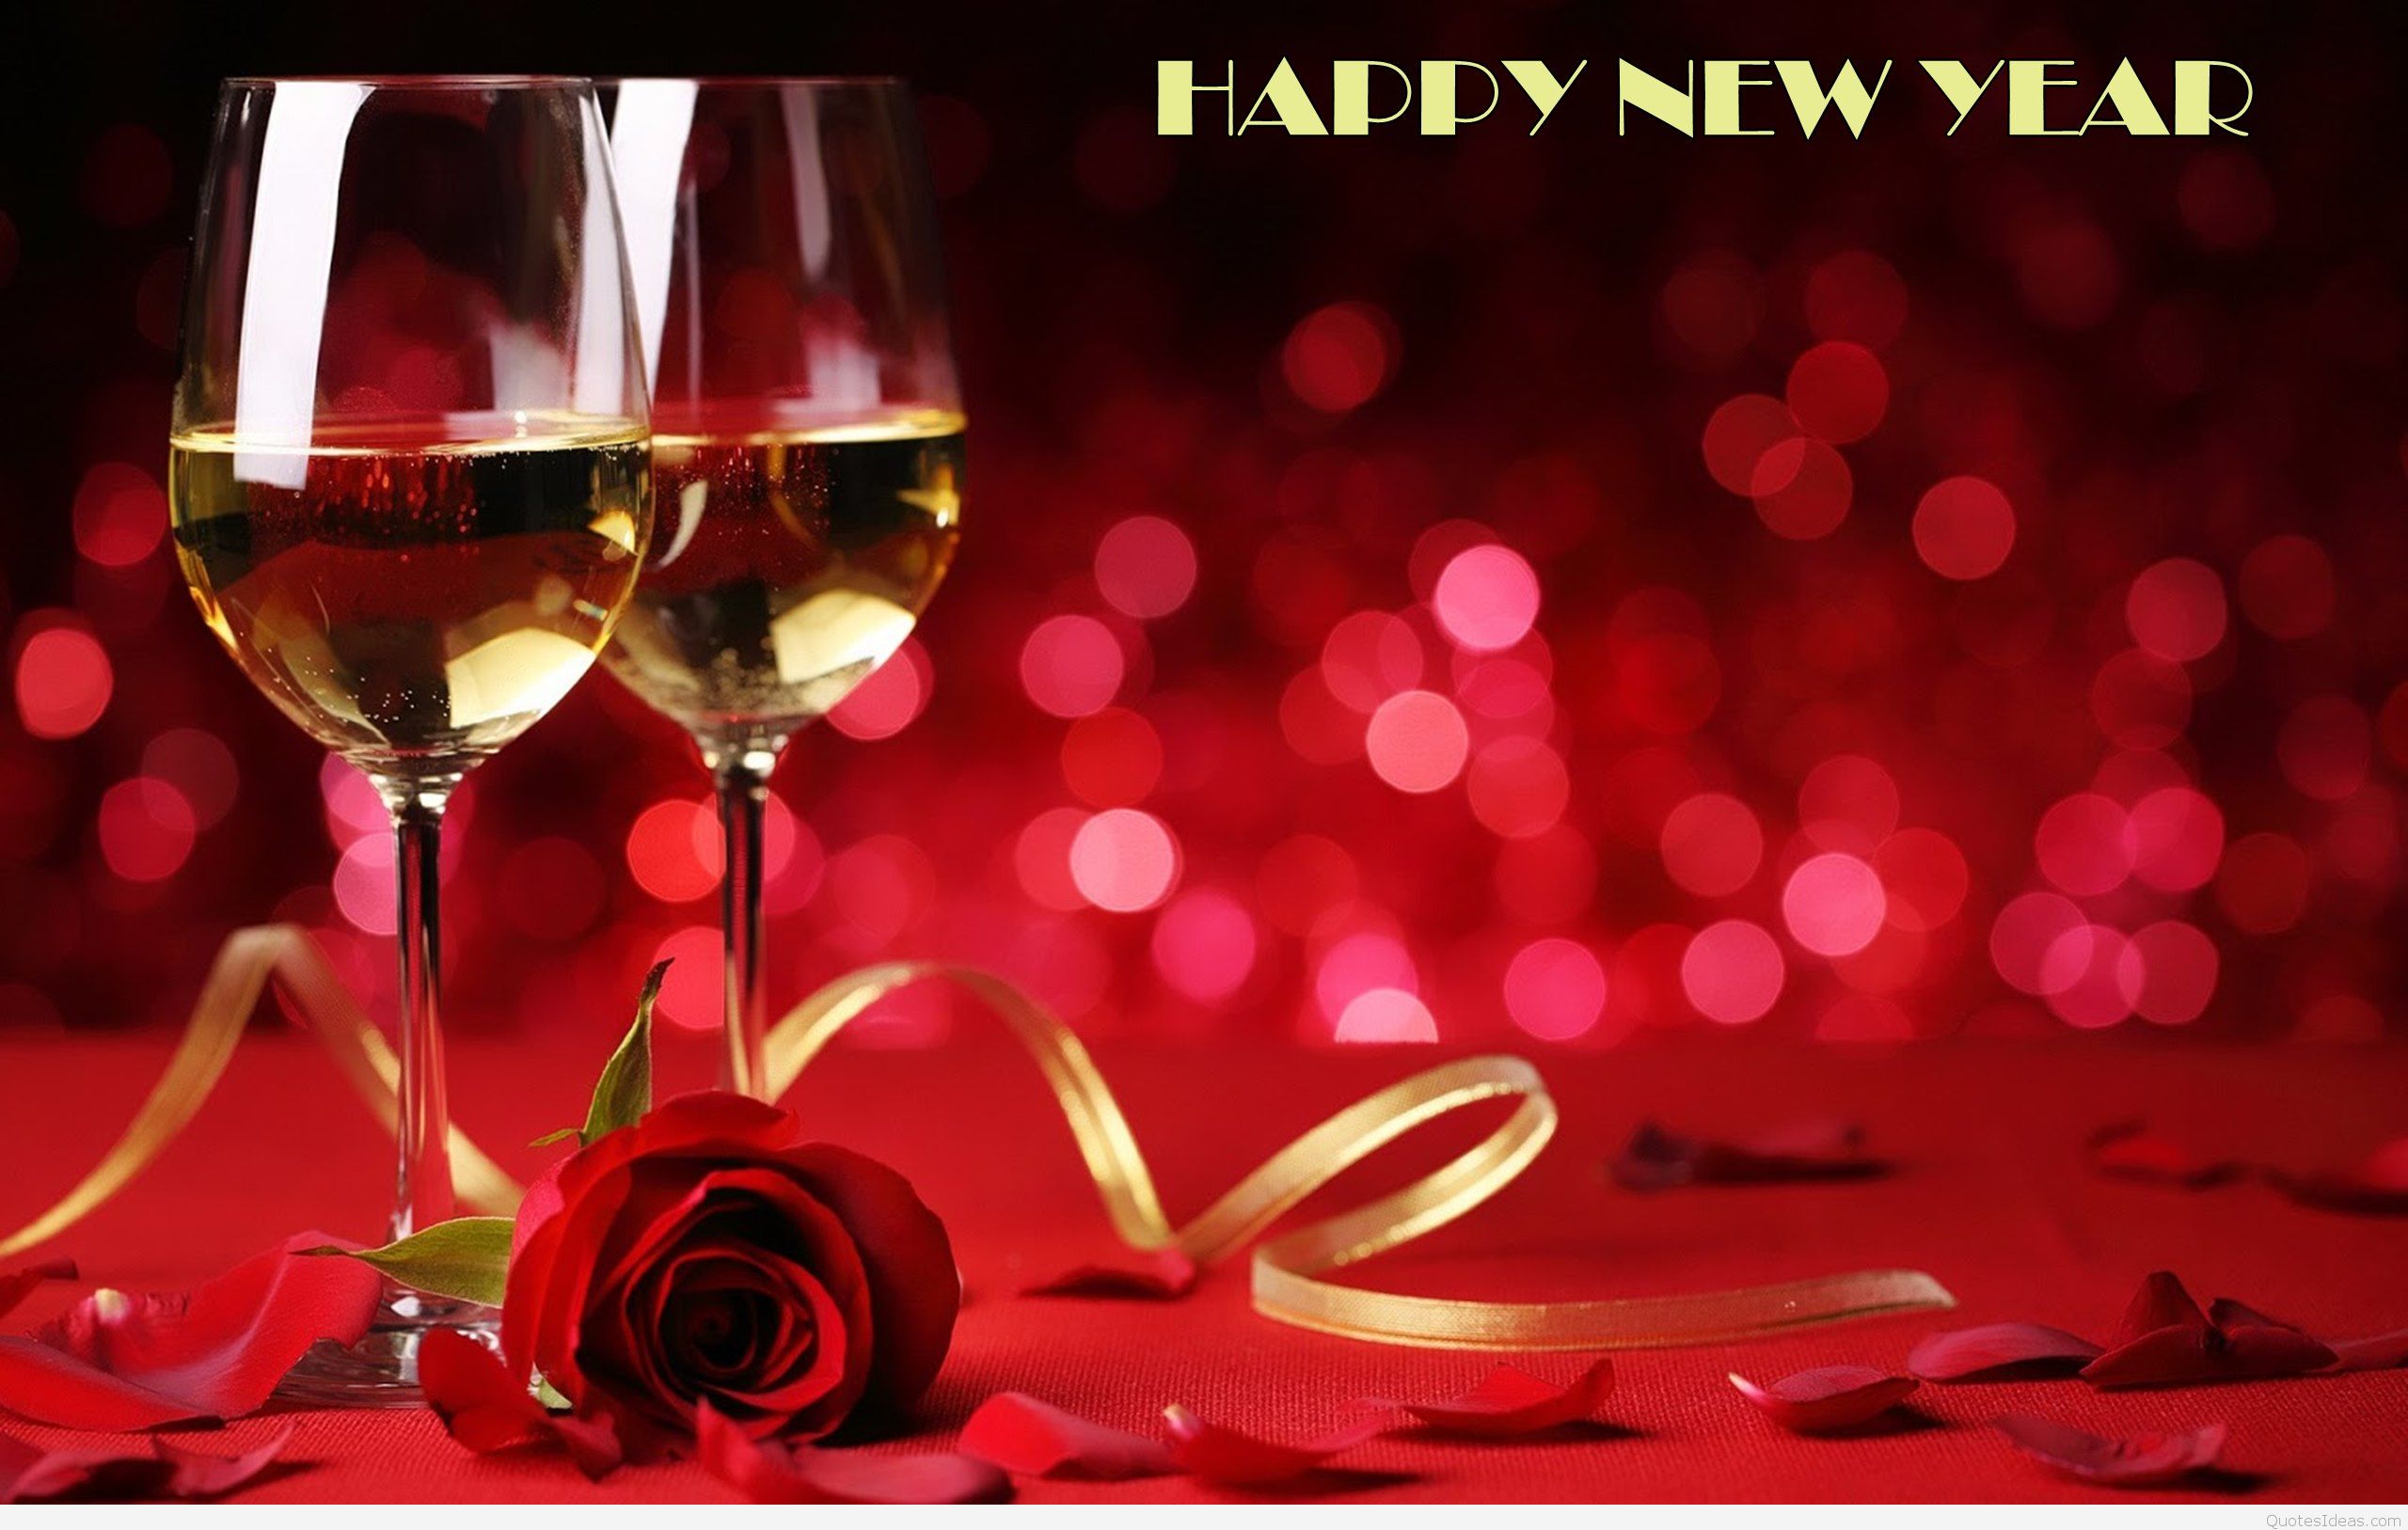 Happy new year eve party hd wallpaper 2016 2560x1627